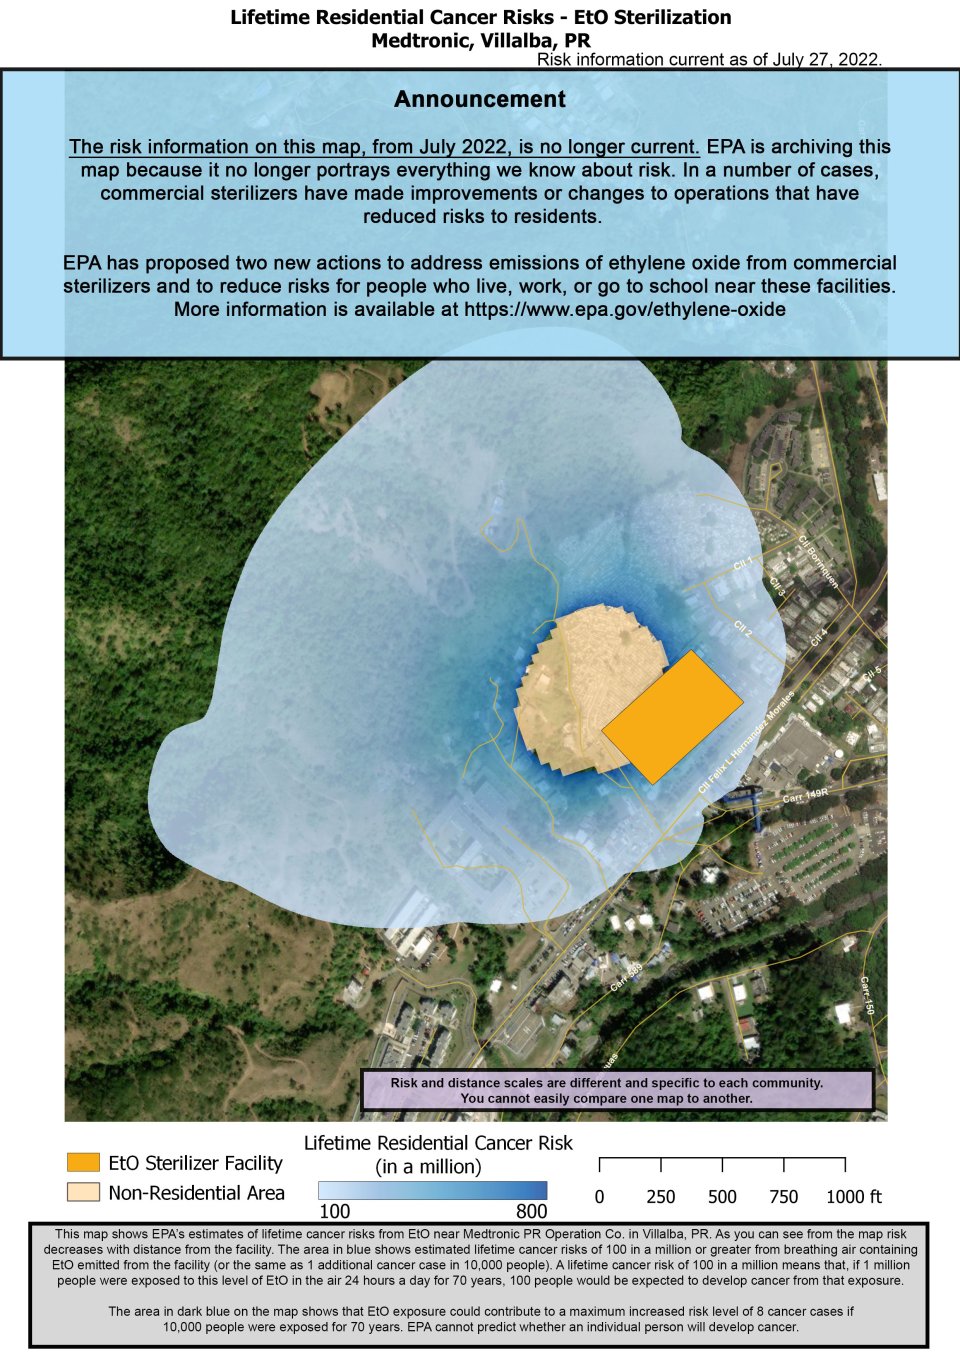 This map shows EPA’s estimate of lifetime cancer risks from breathing ethylene oxide near Medtronic PR Operation Co. located at Carretera 151, Bo. Villalba Arriba, Villalba, PR.  Estimated cancer risk decreases with distance from the facility.  Nearest the facility, the estimated lifetime cancer risk is 800 in a million. This drops to 100 in a million and extends near Lysander Borrero Terry High School to the southwest, near Street #1 and #3 to the northeast, and Villalba’s Cemetery to the north.